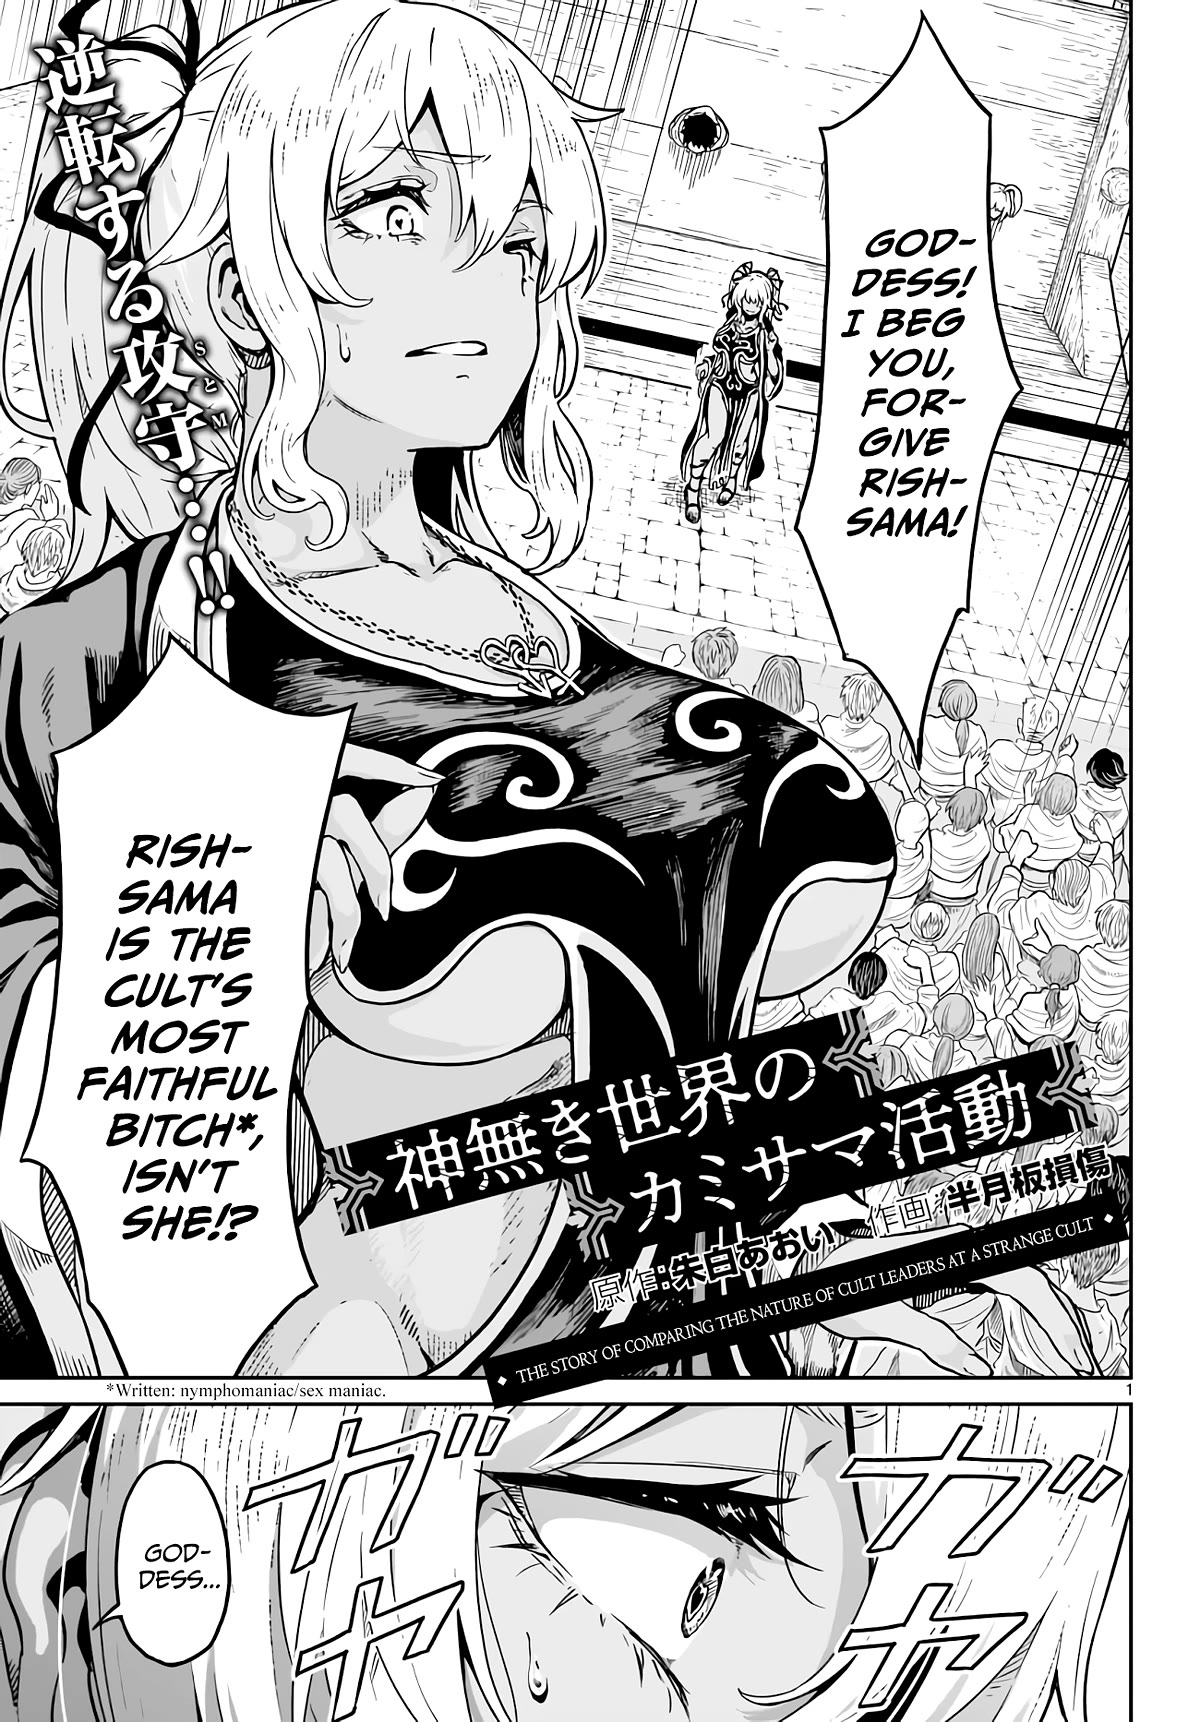 Kaminaki Sekai No Kamisama Katsudou Chapter 16: The Story Of Comparing The Nature Of Cult Leaders At A Strange Cult - Picture 1